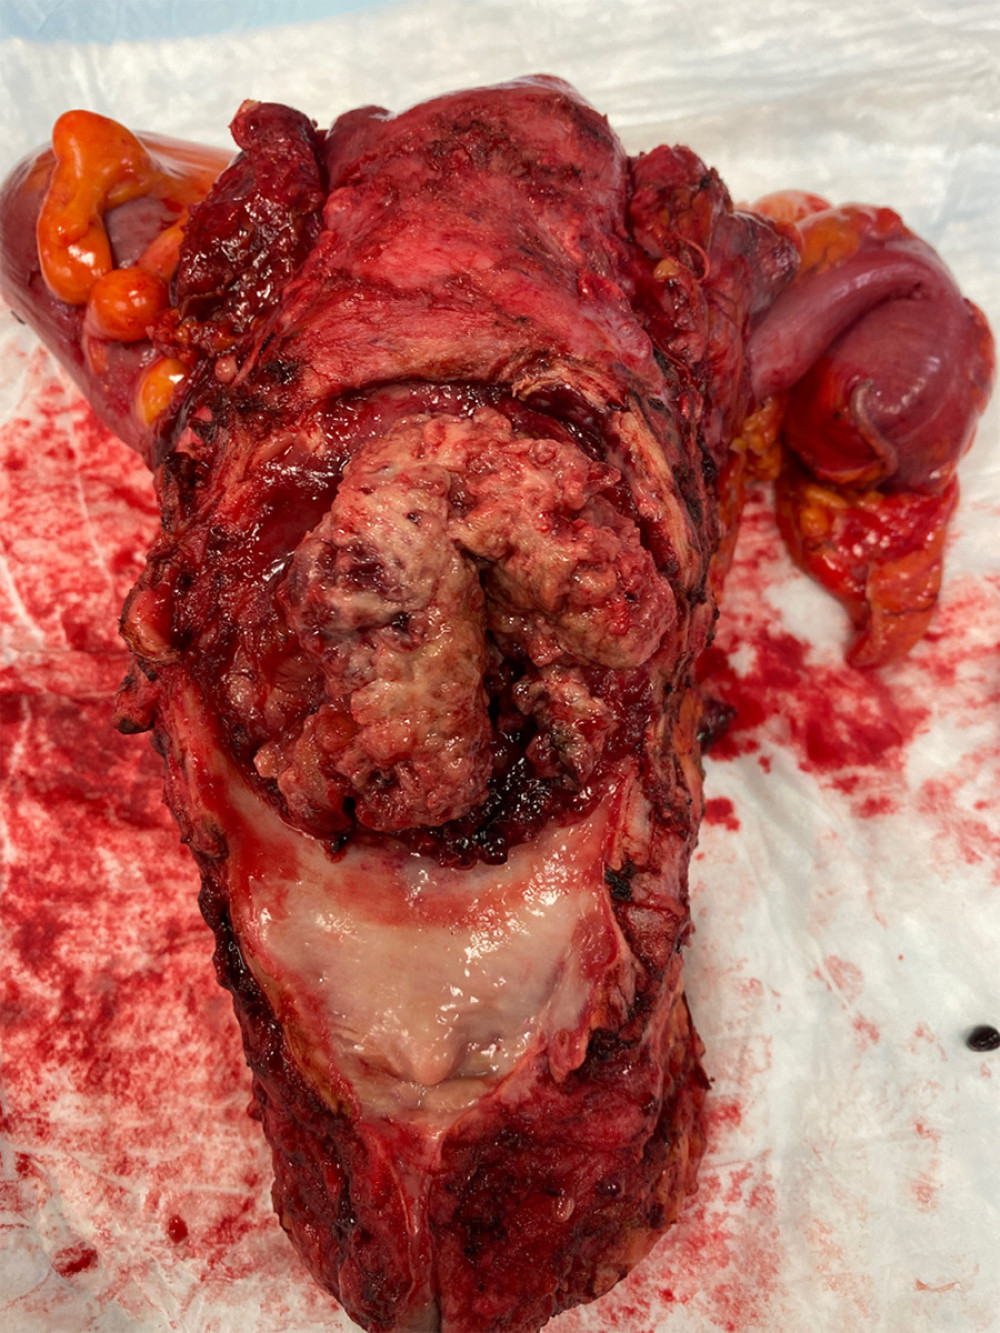 Photo of the resected surgical specimen showing a mass infiltrating from the rectum into the posterior vagina and cervix.